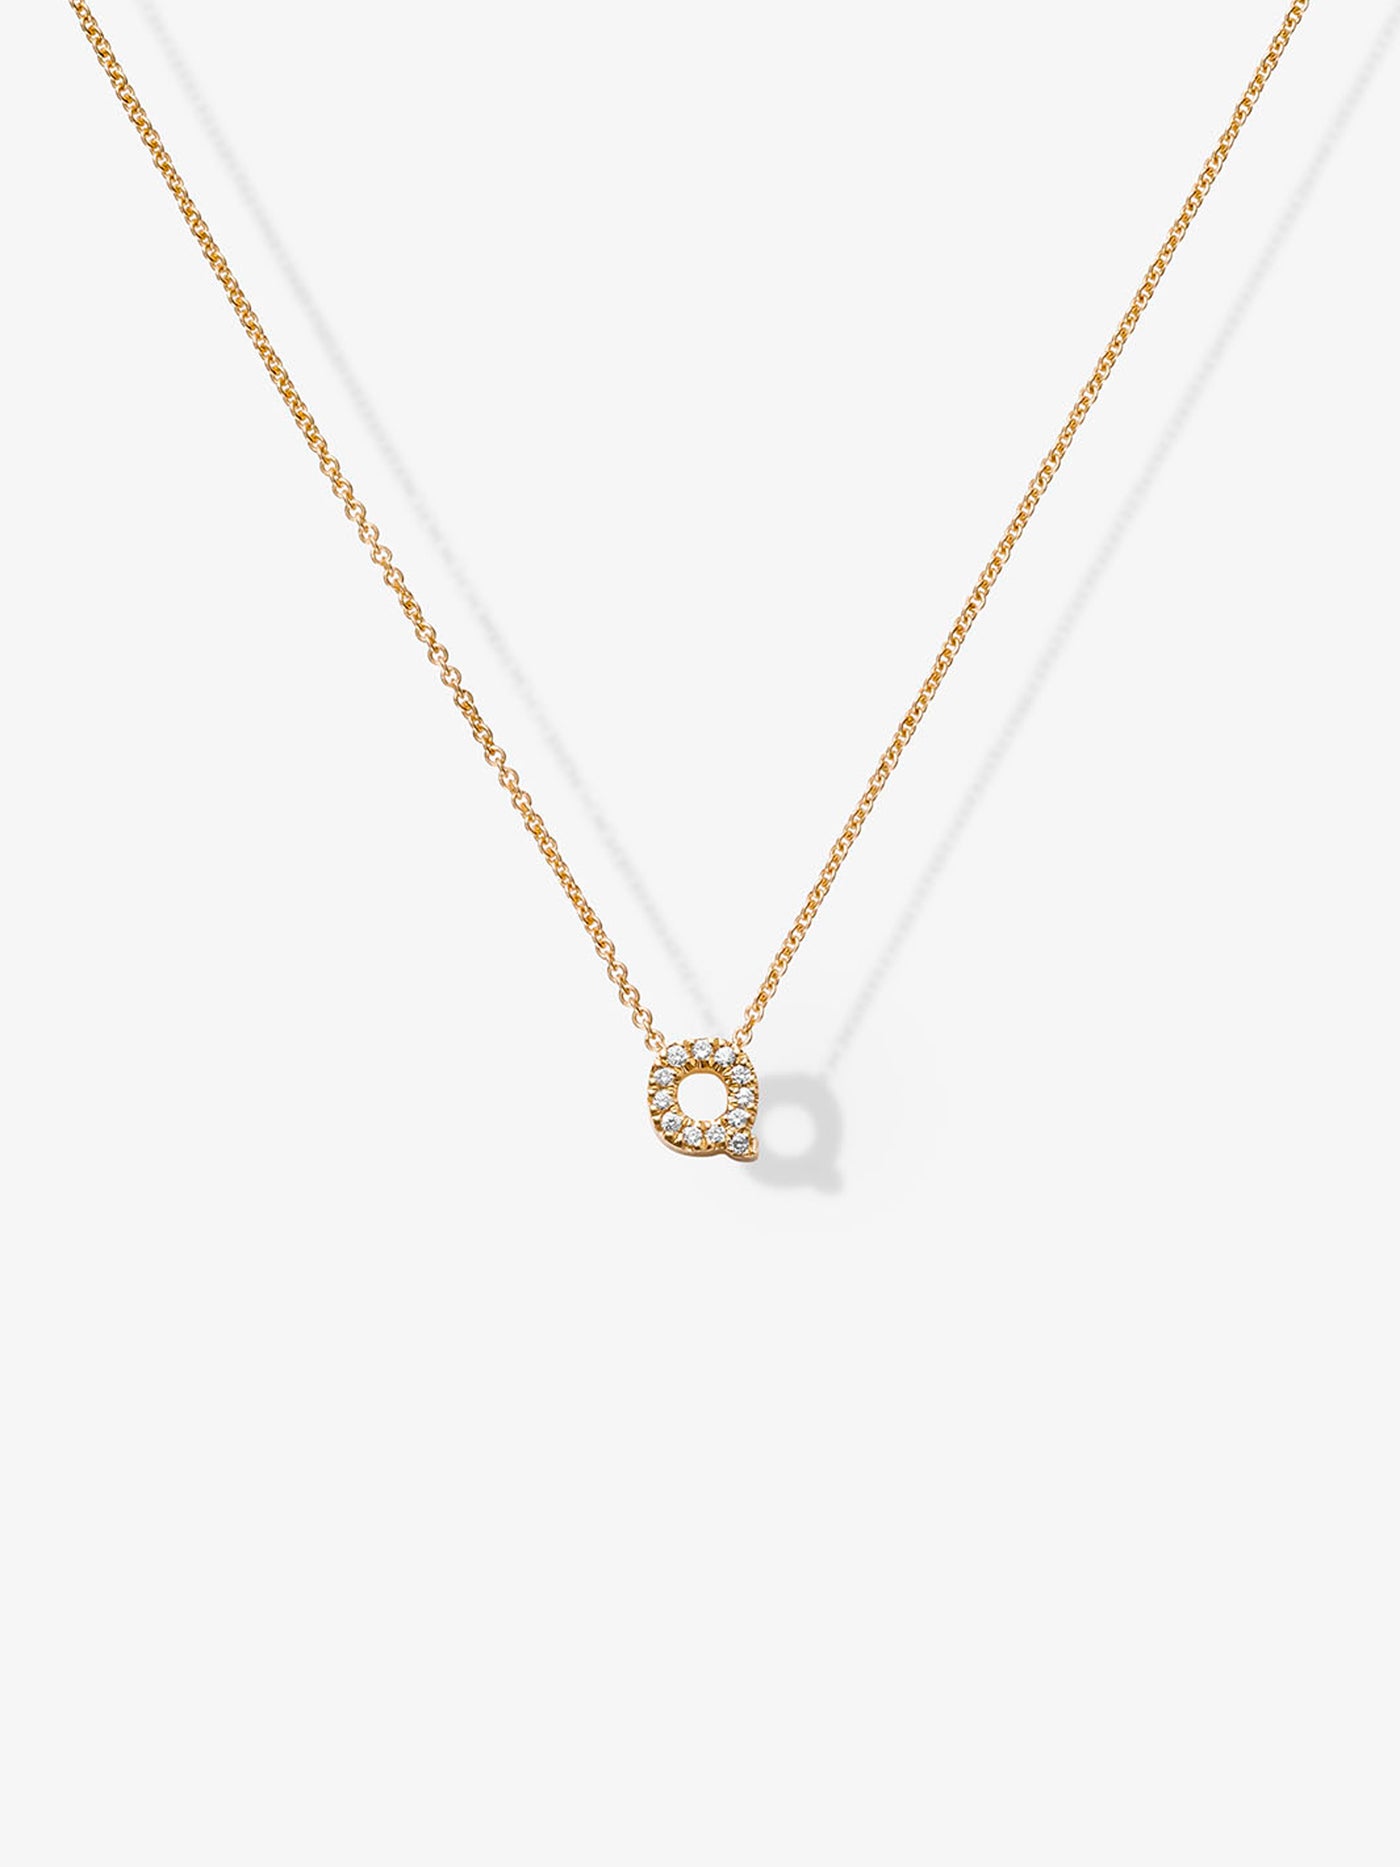 Letter Q Necklace in Diamonds and 18k Gold